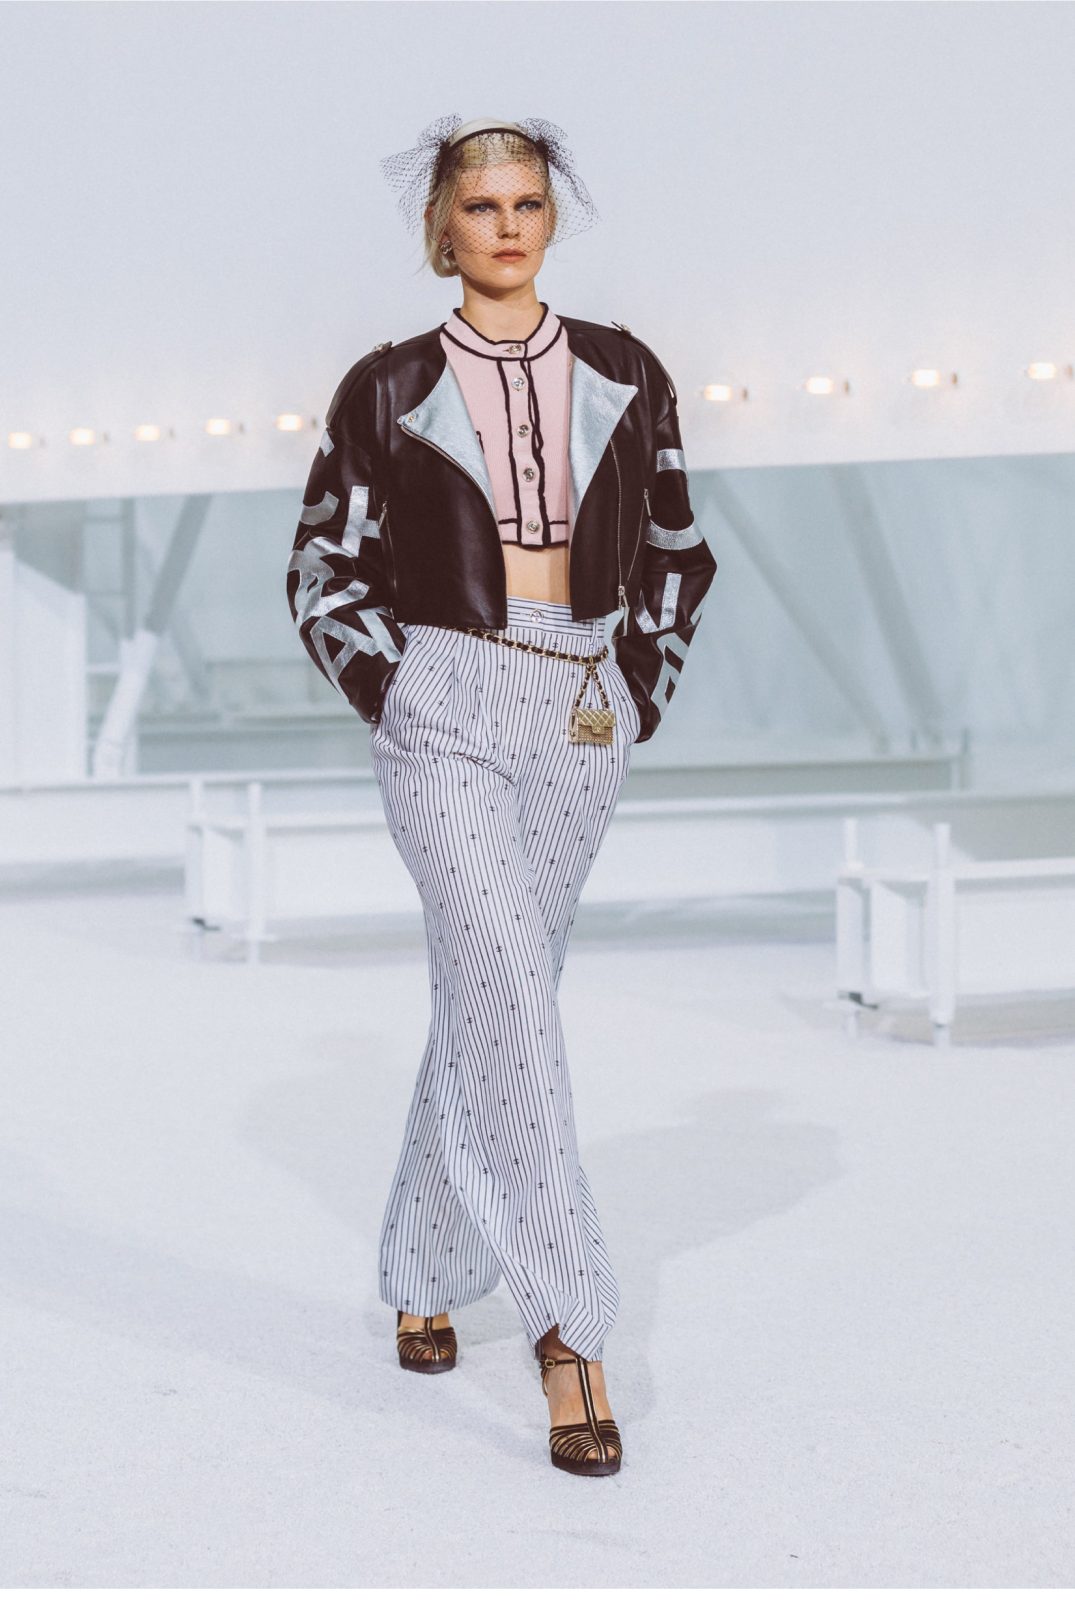 CHANEL SS 2021 By Virginie Viard Takes Us to Hollywood